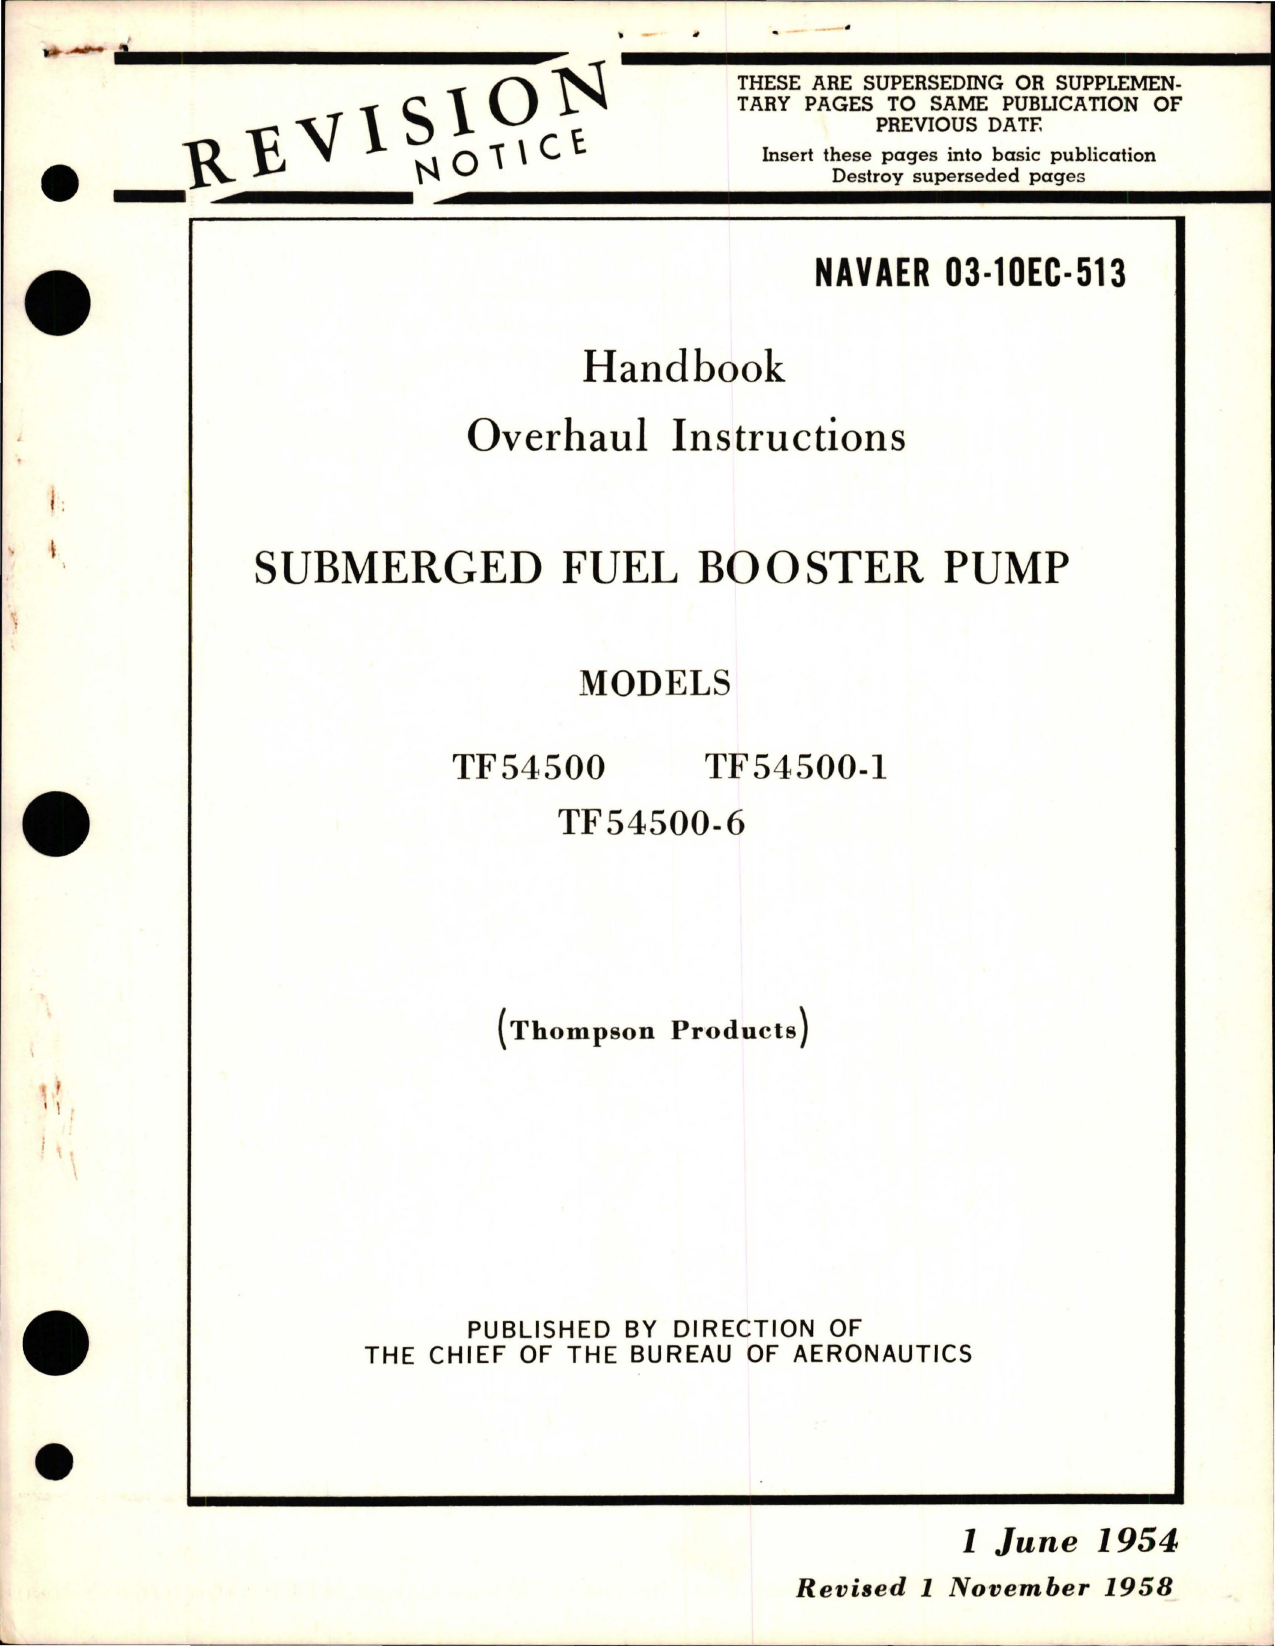 Sample page 1 from AirCorps Library document: Overhaul Instructions for Submerged Fuel Booster Pump - Models TF54500, TF54500-1, and TF54500-6